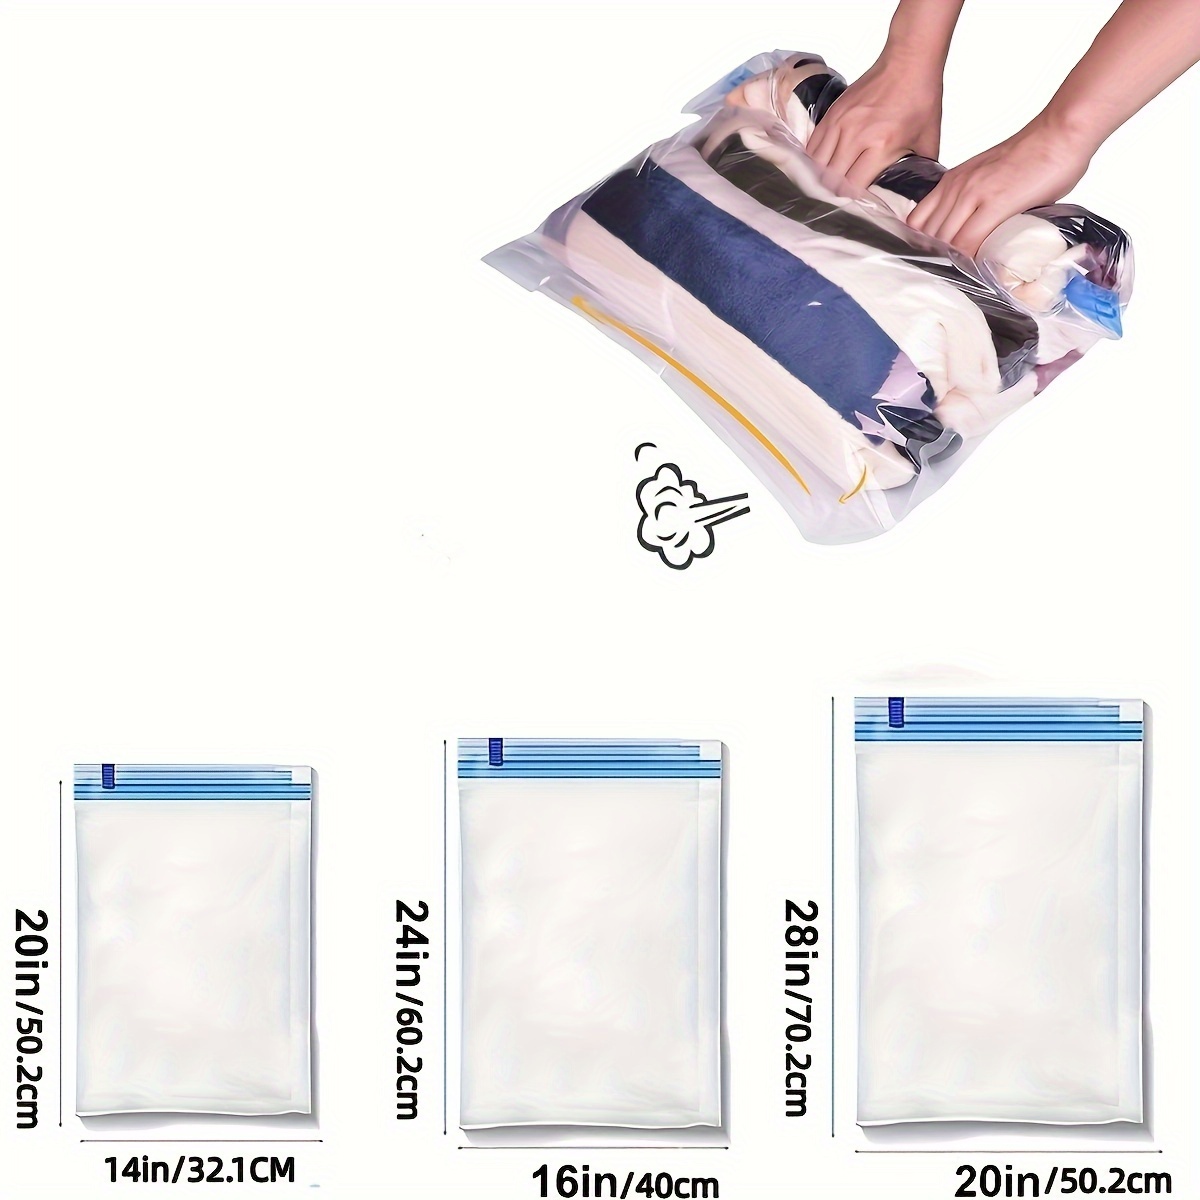 Vacuum Compression Bag, Travel Storage Bags For Clothing - Compression Bags  For Travel - No Vacuum Or Pump Bags - Save Space In Luggage Accessories -  Temu